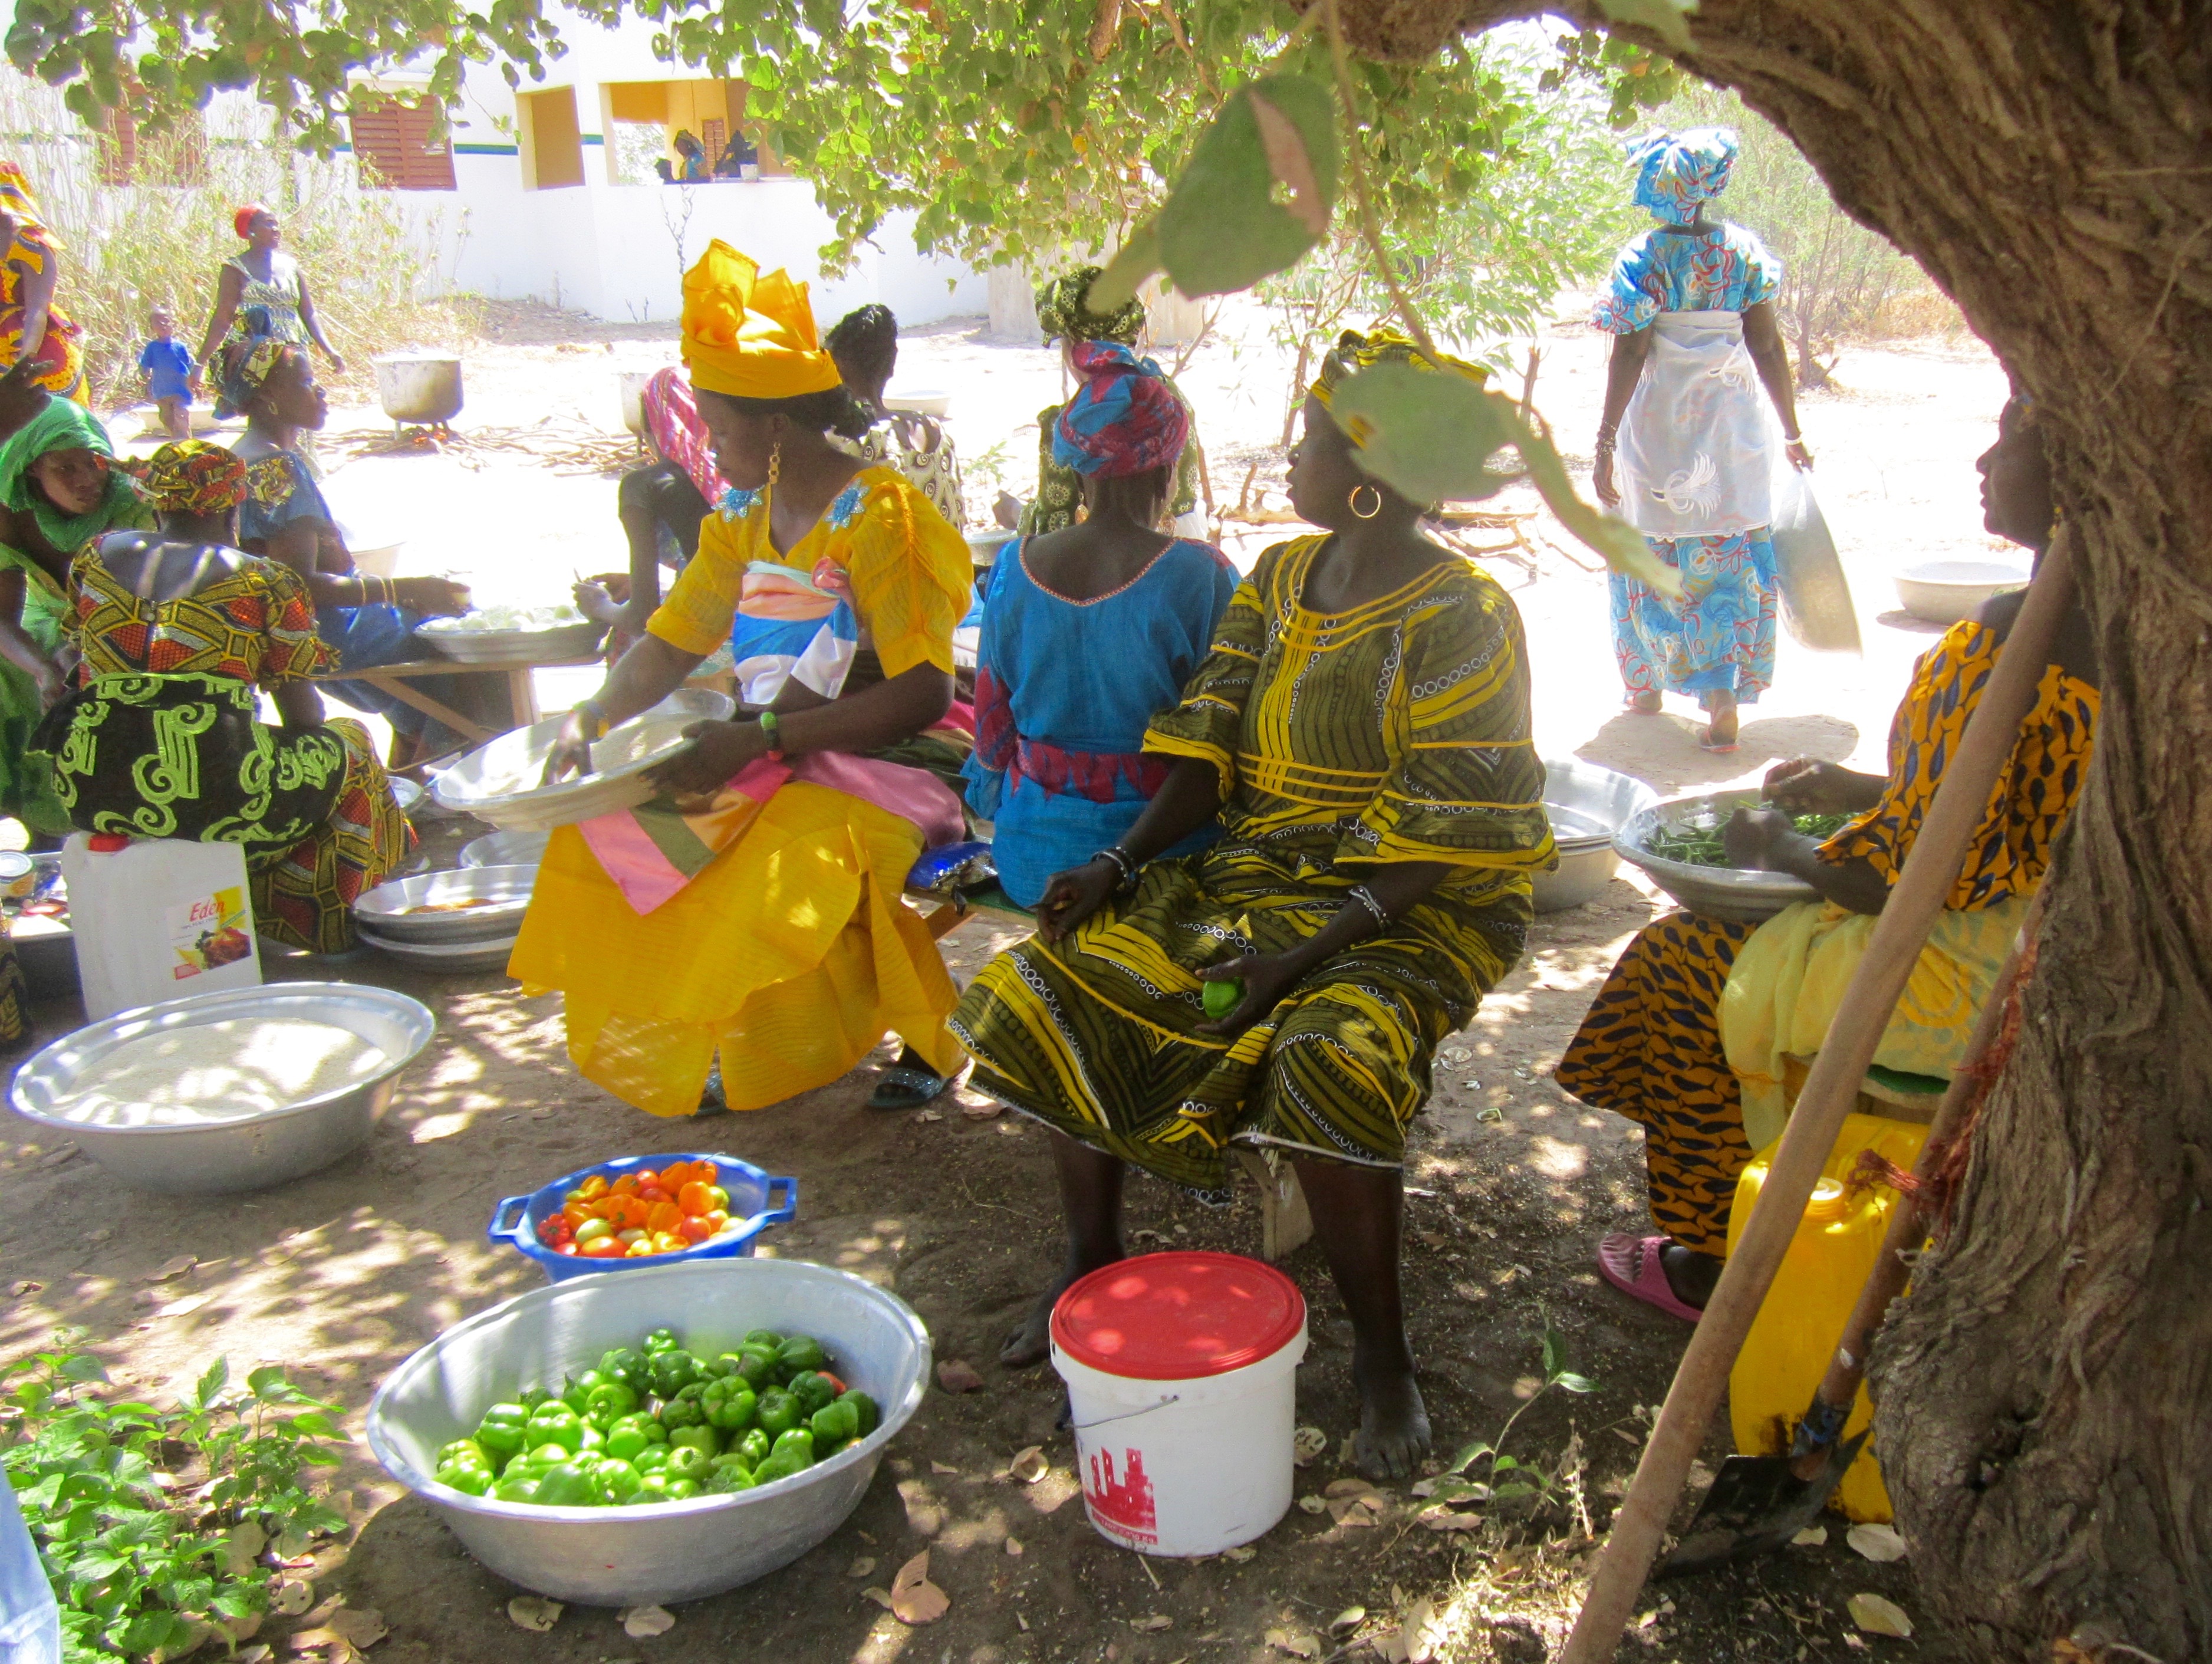 Cooperative members prepared a delicious lunch using vegetables and chickens produced in the graduating communities.